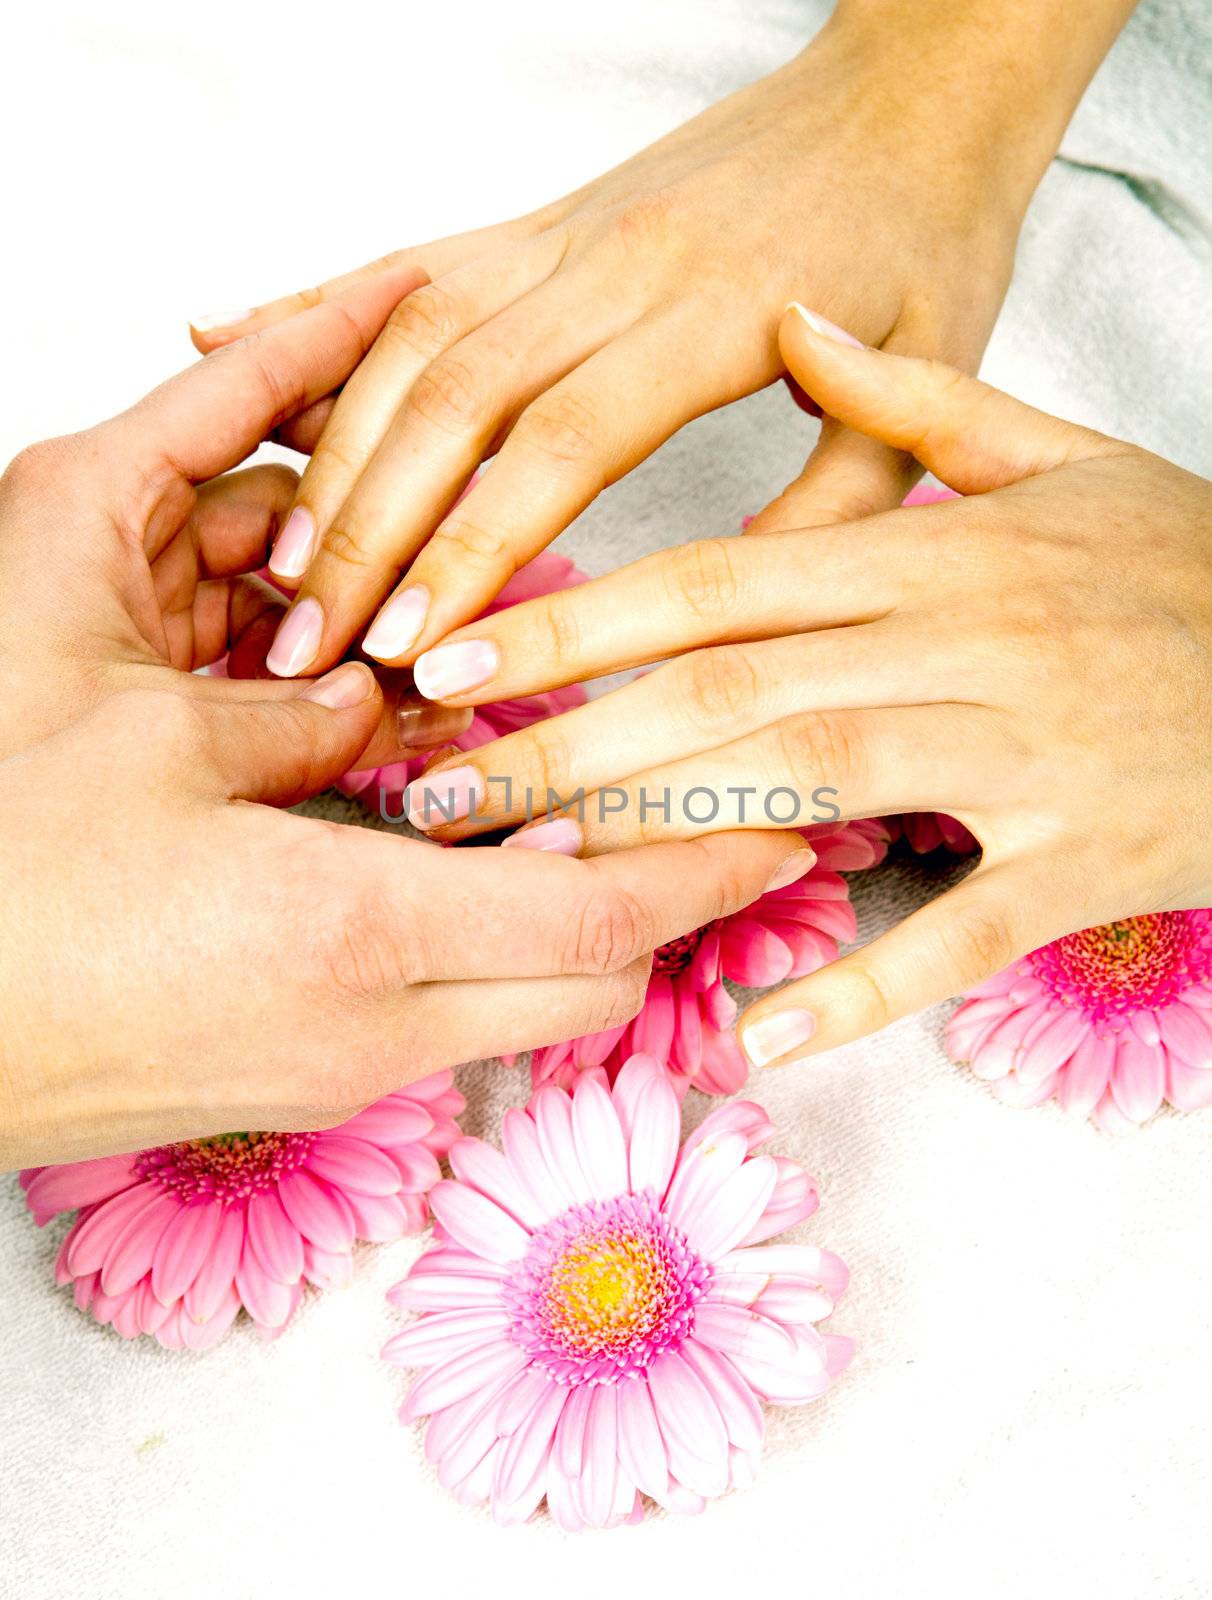 feminin hands with a treatment doing a manicure closeup by juniart